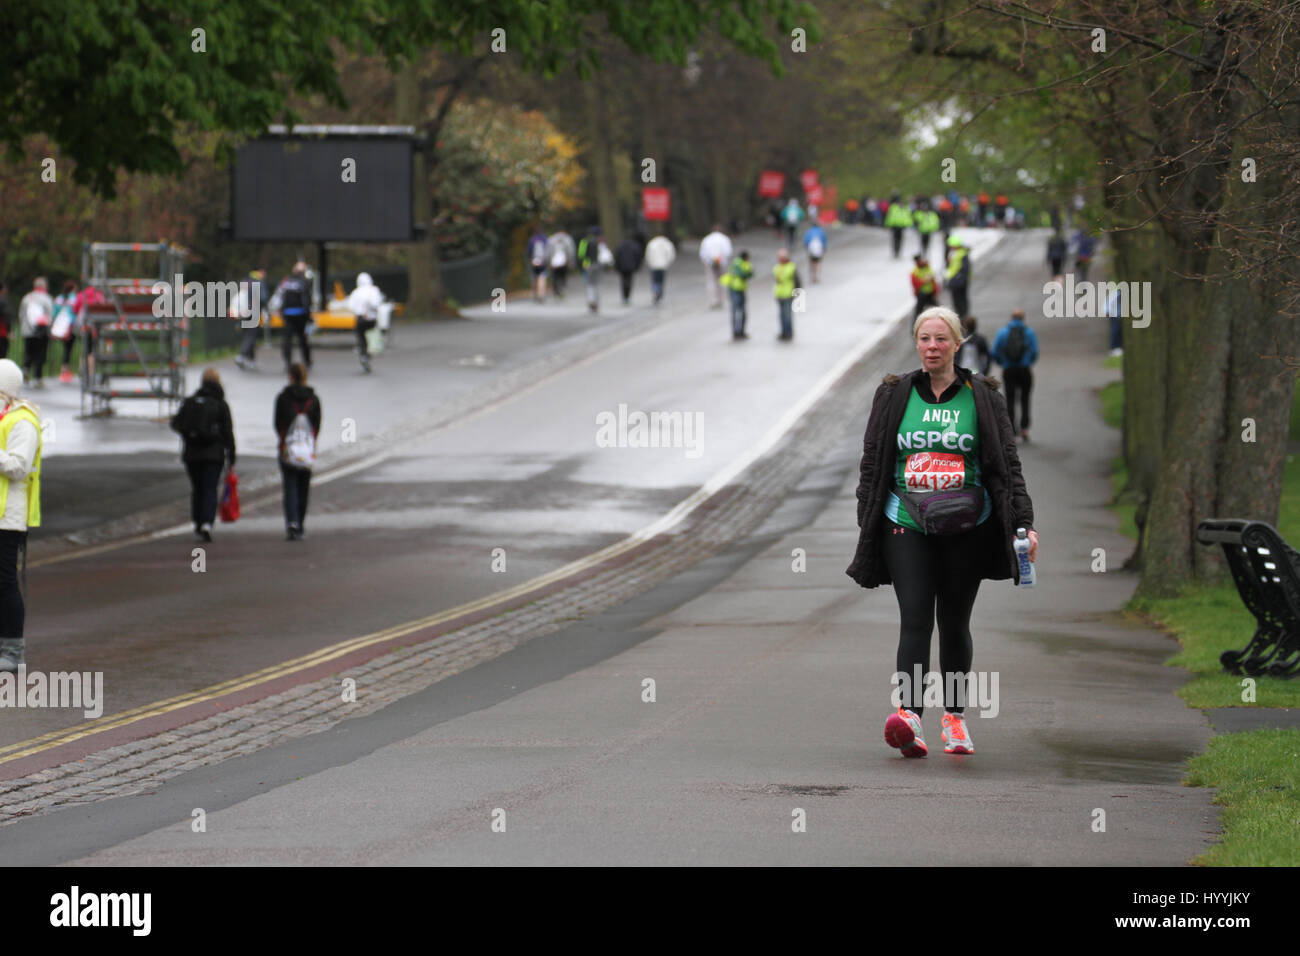 London, UK 24 April 2016. Andy walks down Greenwich park looking for her fellow NSPCC runners. Three quarters of all London Marathon competitors run for a charity, the NSPCC being the Official charity of the 2016 marathon. Approximately 38,000 runners are expected to start the run, with the London Marathon’s one millionth finisher crosing the line during this years race, a milestone in the history of the race that started in 1981. © David Mbiyu/Alamy Live News Stock Photo